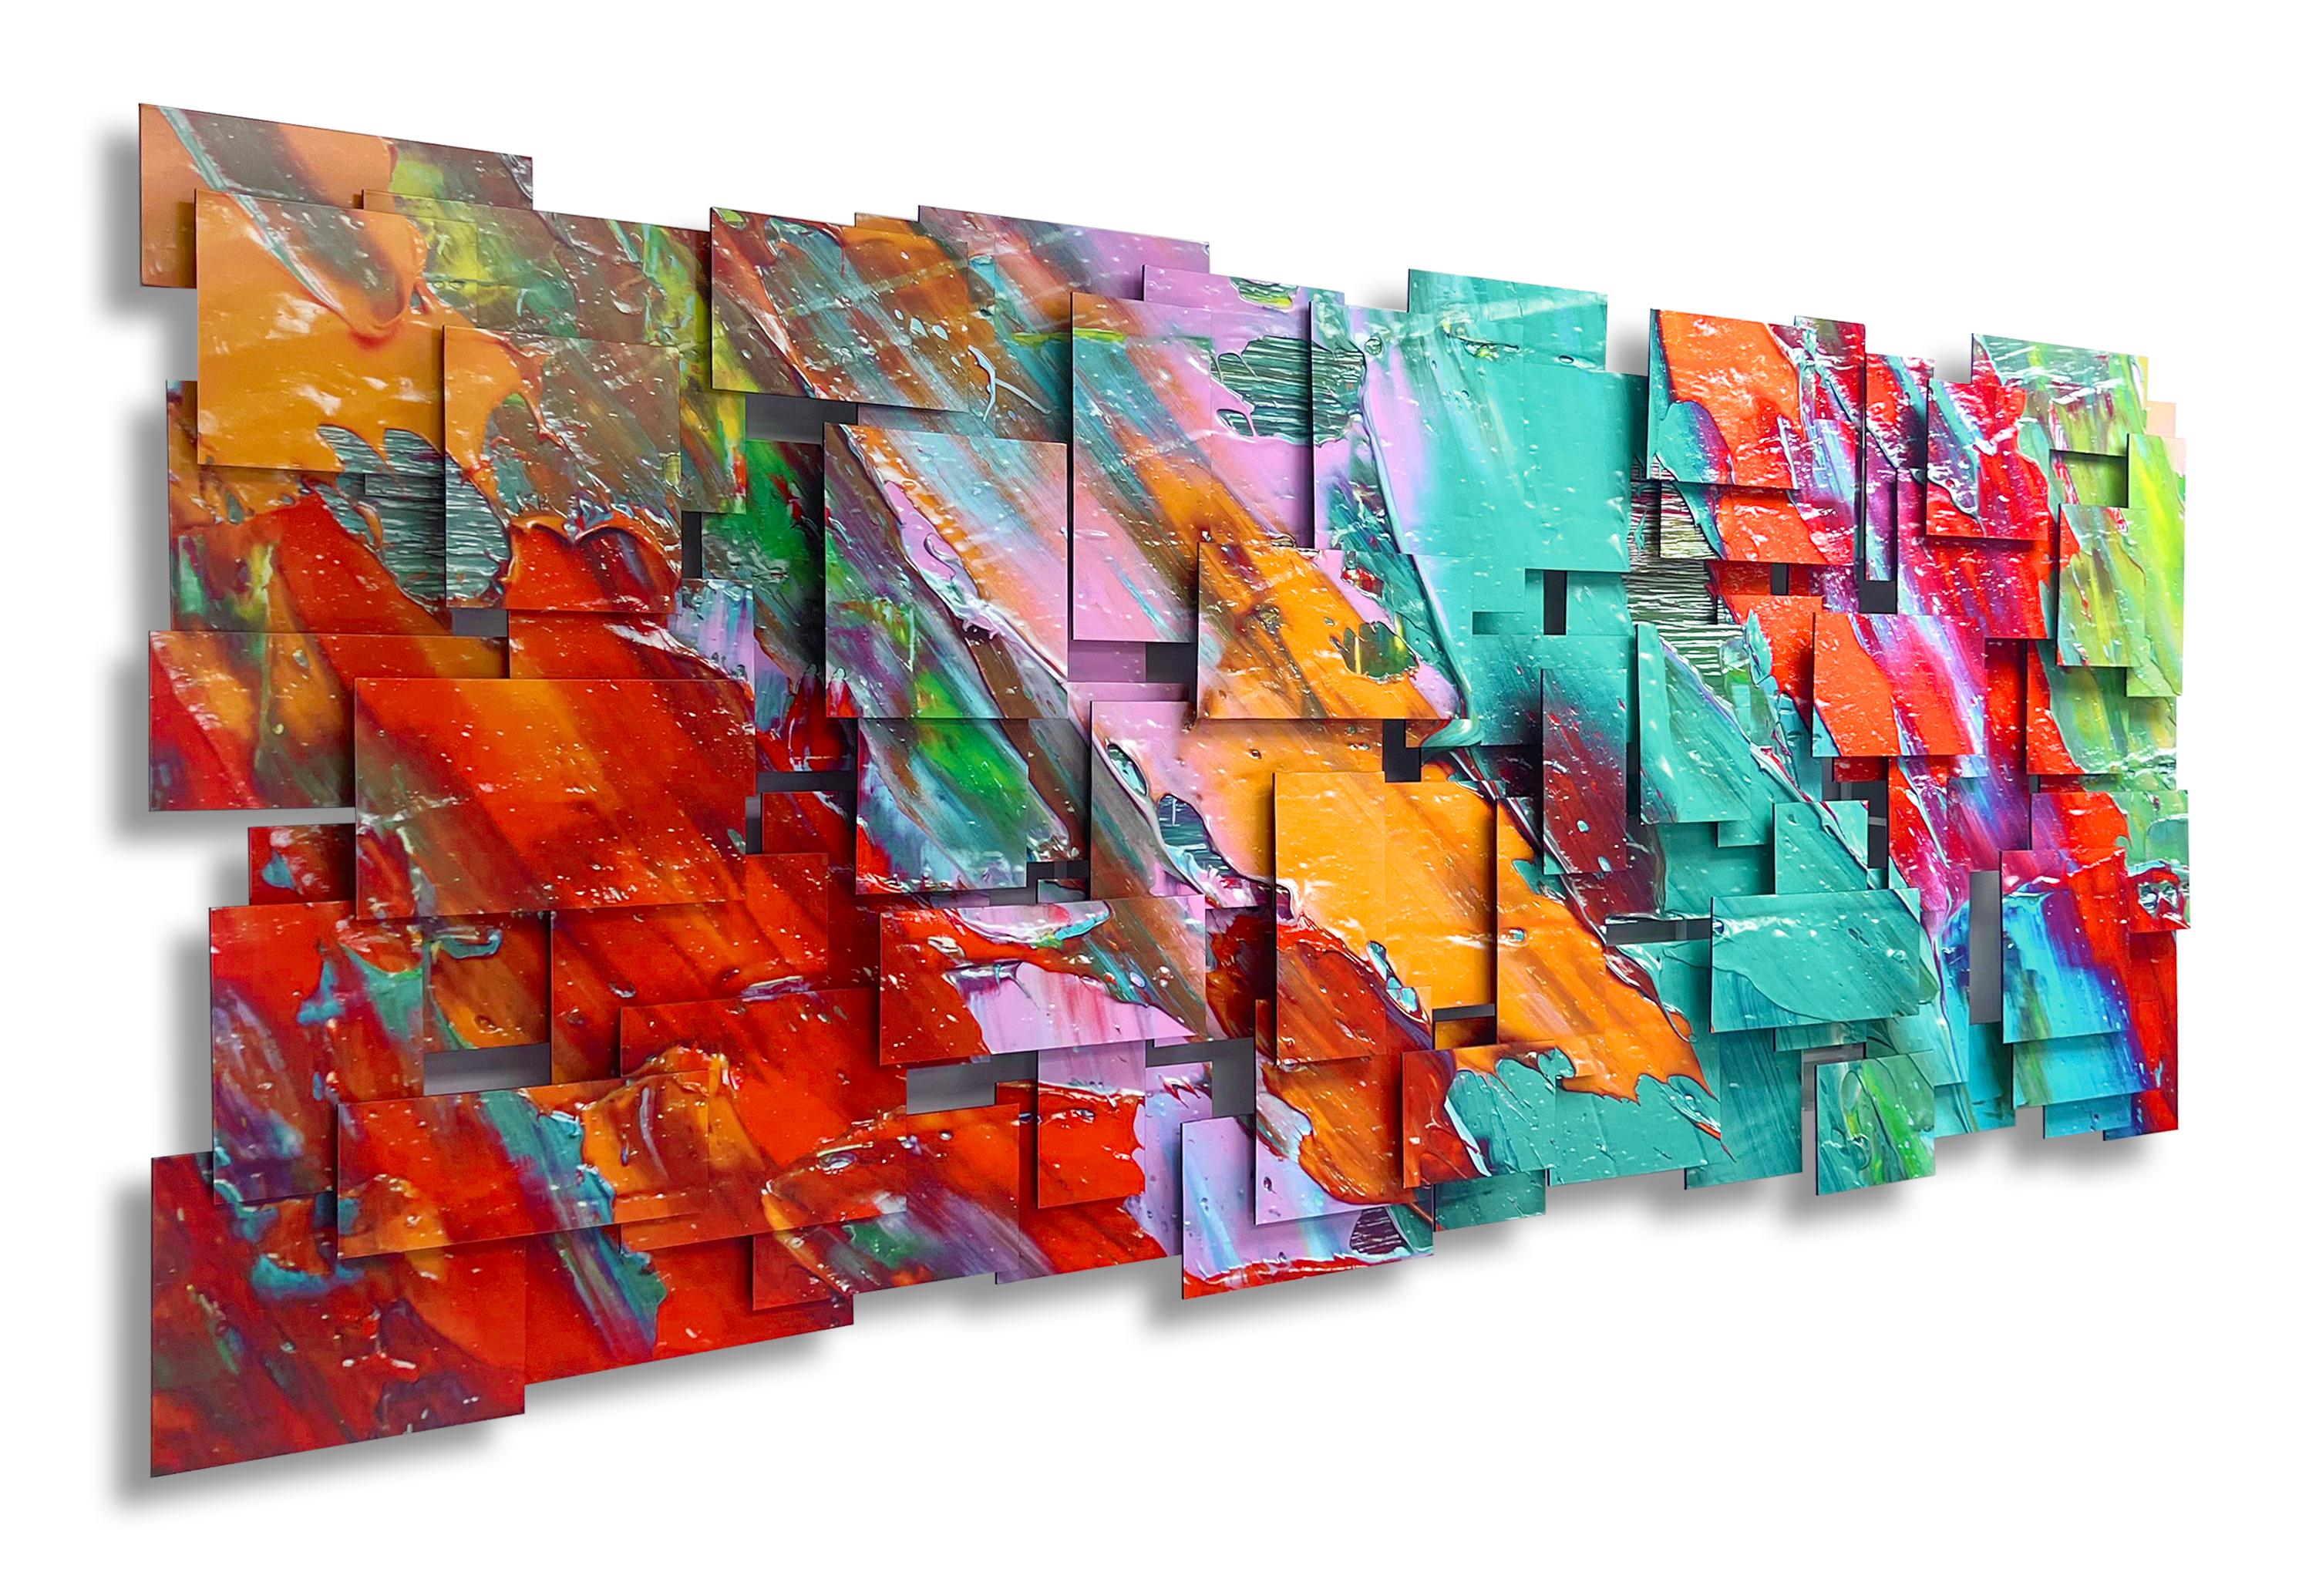 Through a deconstructive process, a photograph is broken down into individual aluminum composite tiles which are hand cut and placed over a welded metal frame on different elevations to create a 3D dynamic and harmonious composition. Each piece is